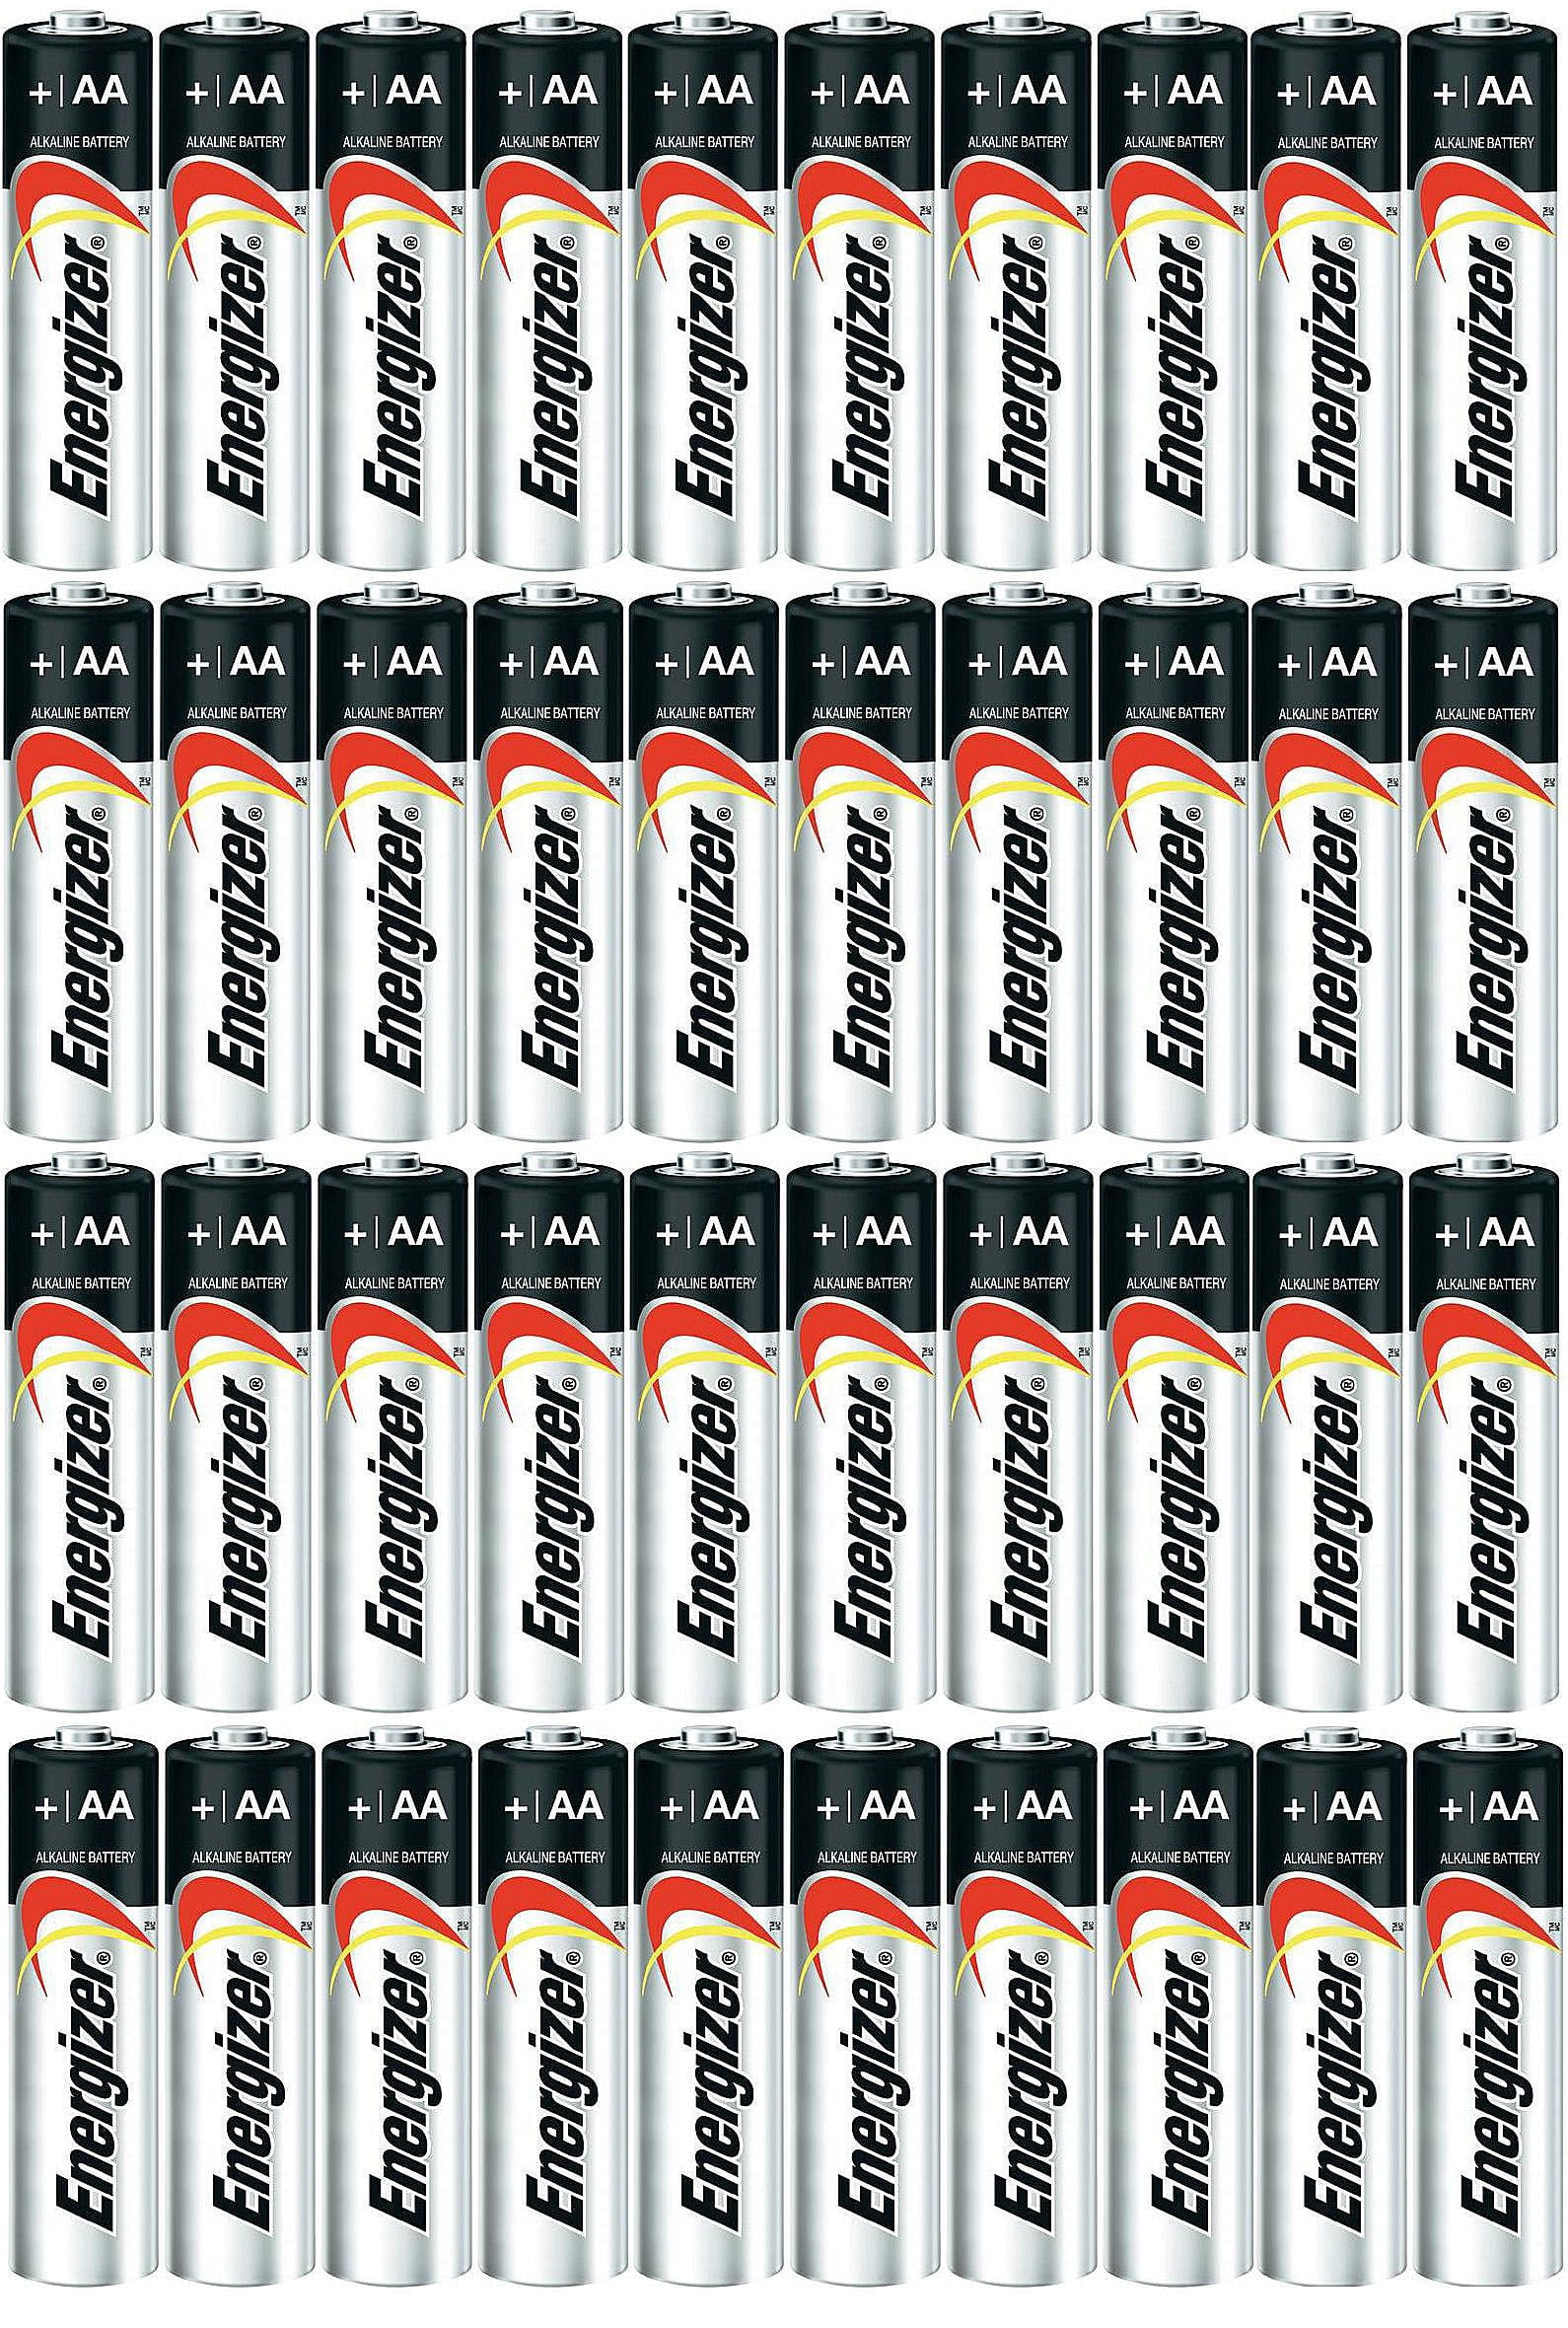 Alkaline Energizer AA Max USA count E91 or later 12/2024 Expiration Made in - - 40 Batteries